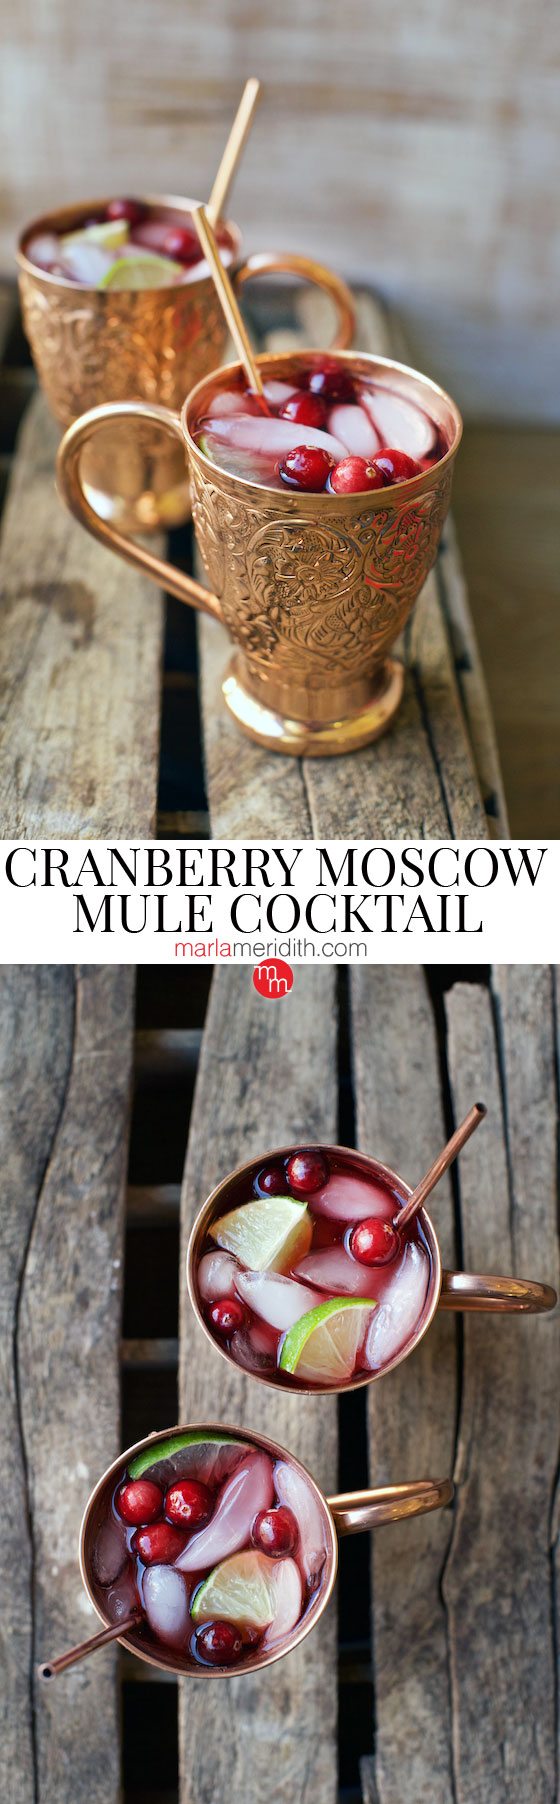 Our Cranberry Moscow Mule Cocktail would be so beautiful at your holiday table! MarlaMeridith.com ( @marlameridith ) #cocktail #recipe